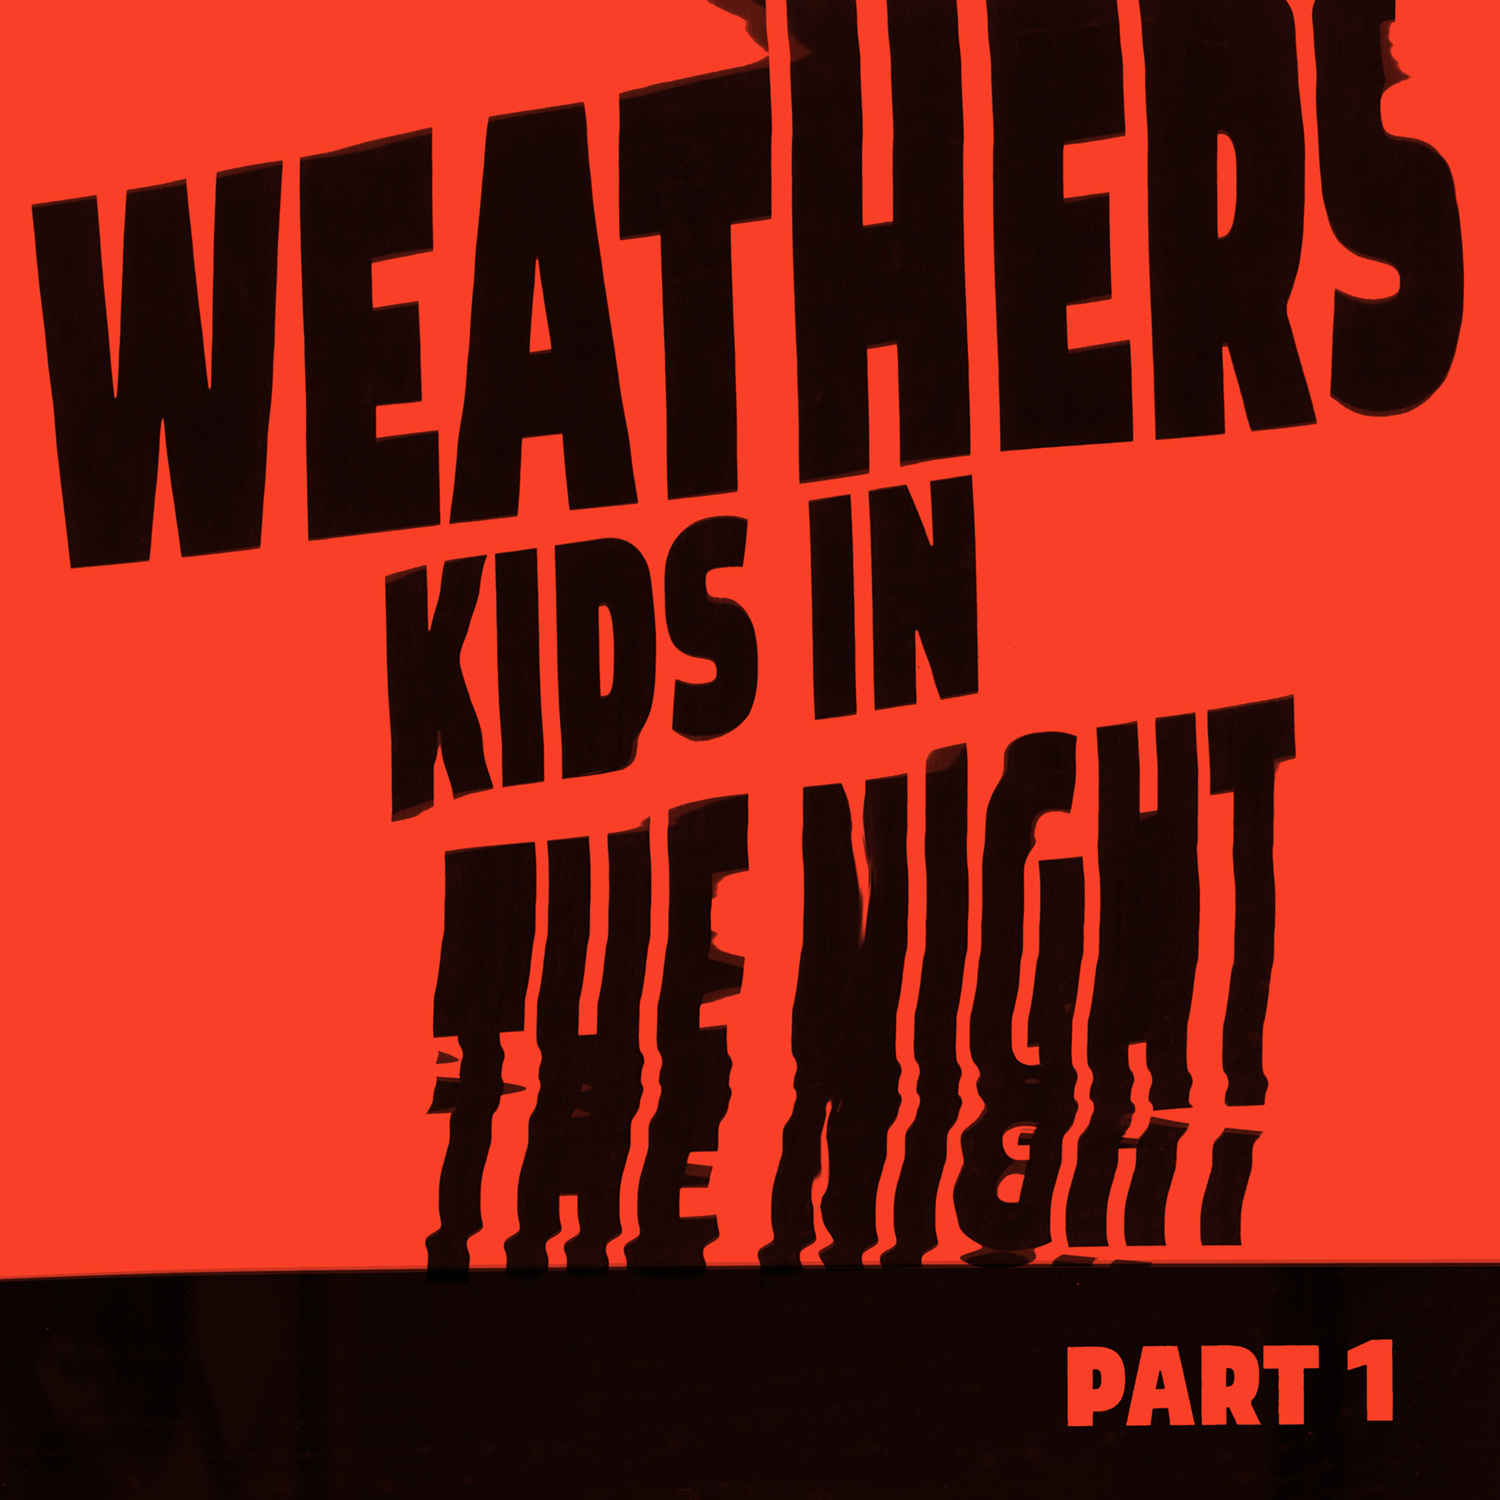 Weathers_Kids_In_The_Night_Cover_Part1_5x5_M1